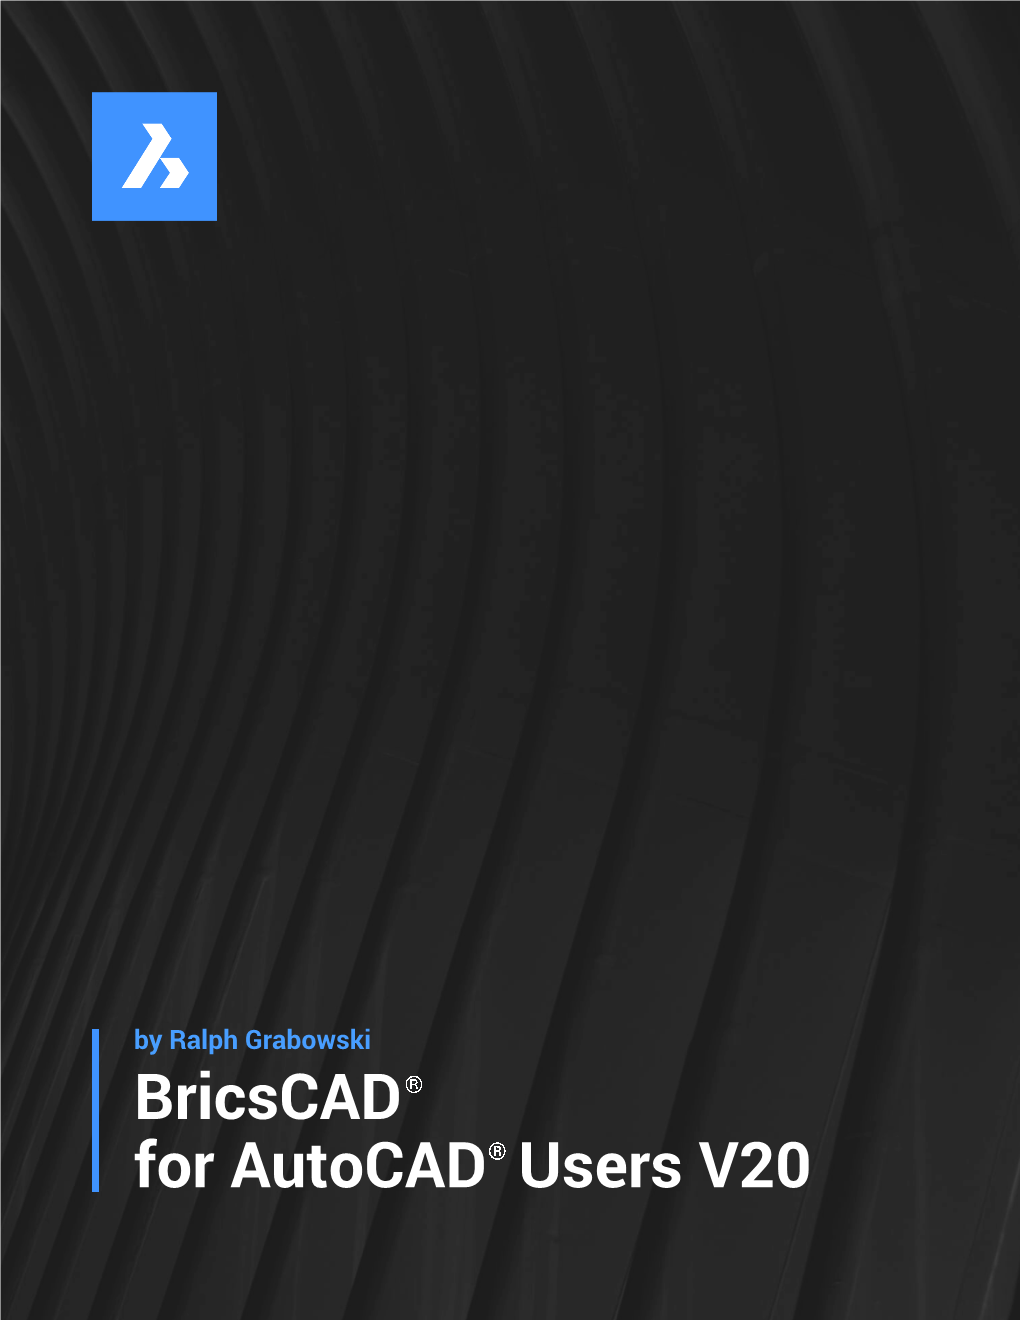 Bricscad for Autocad Users V20 Payment Information